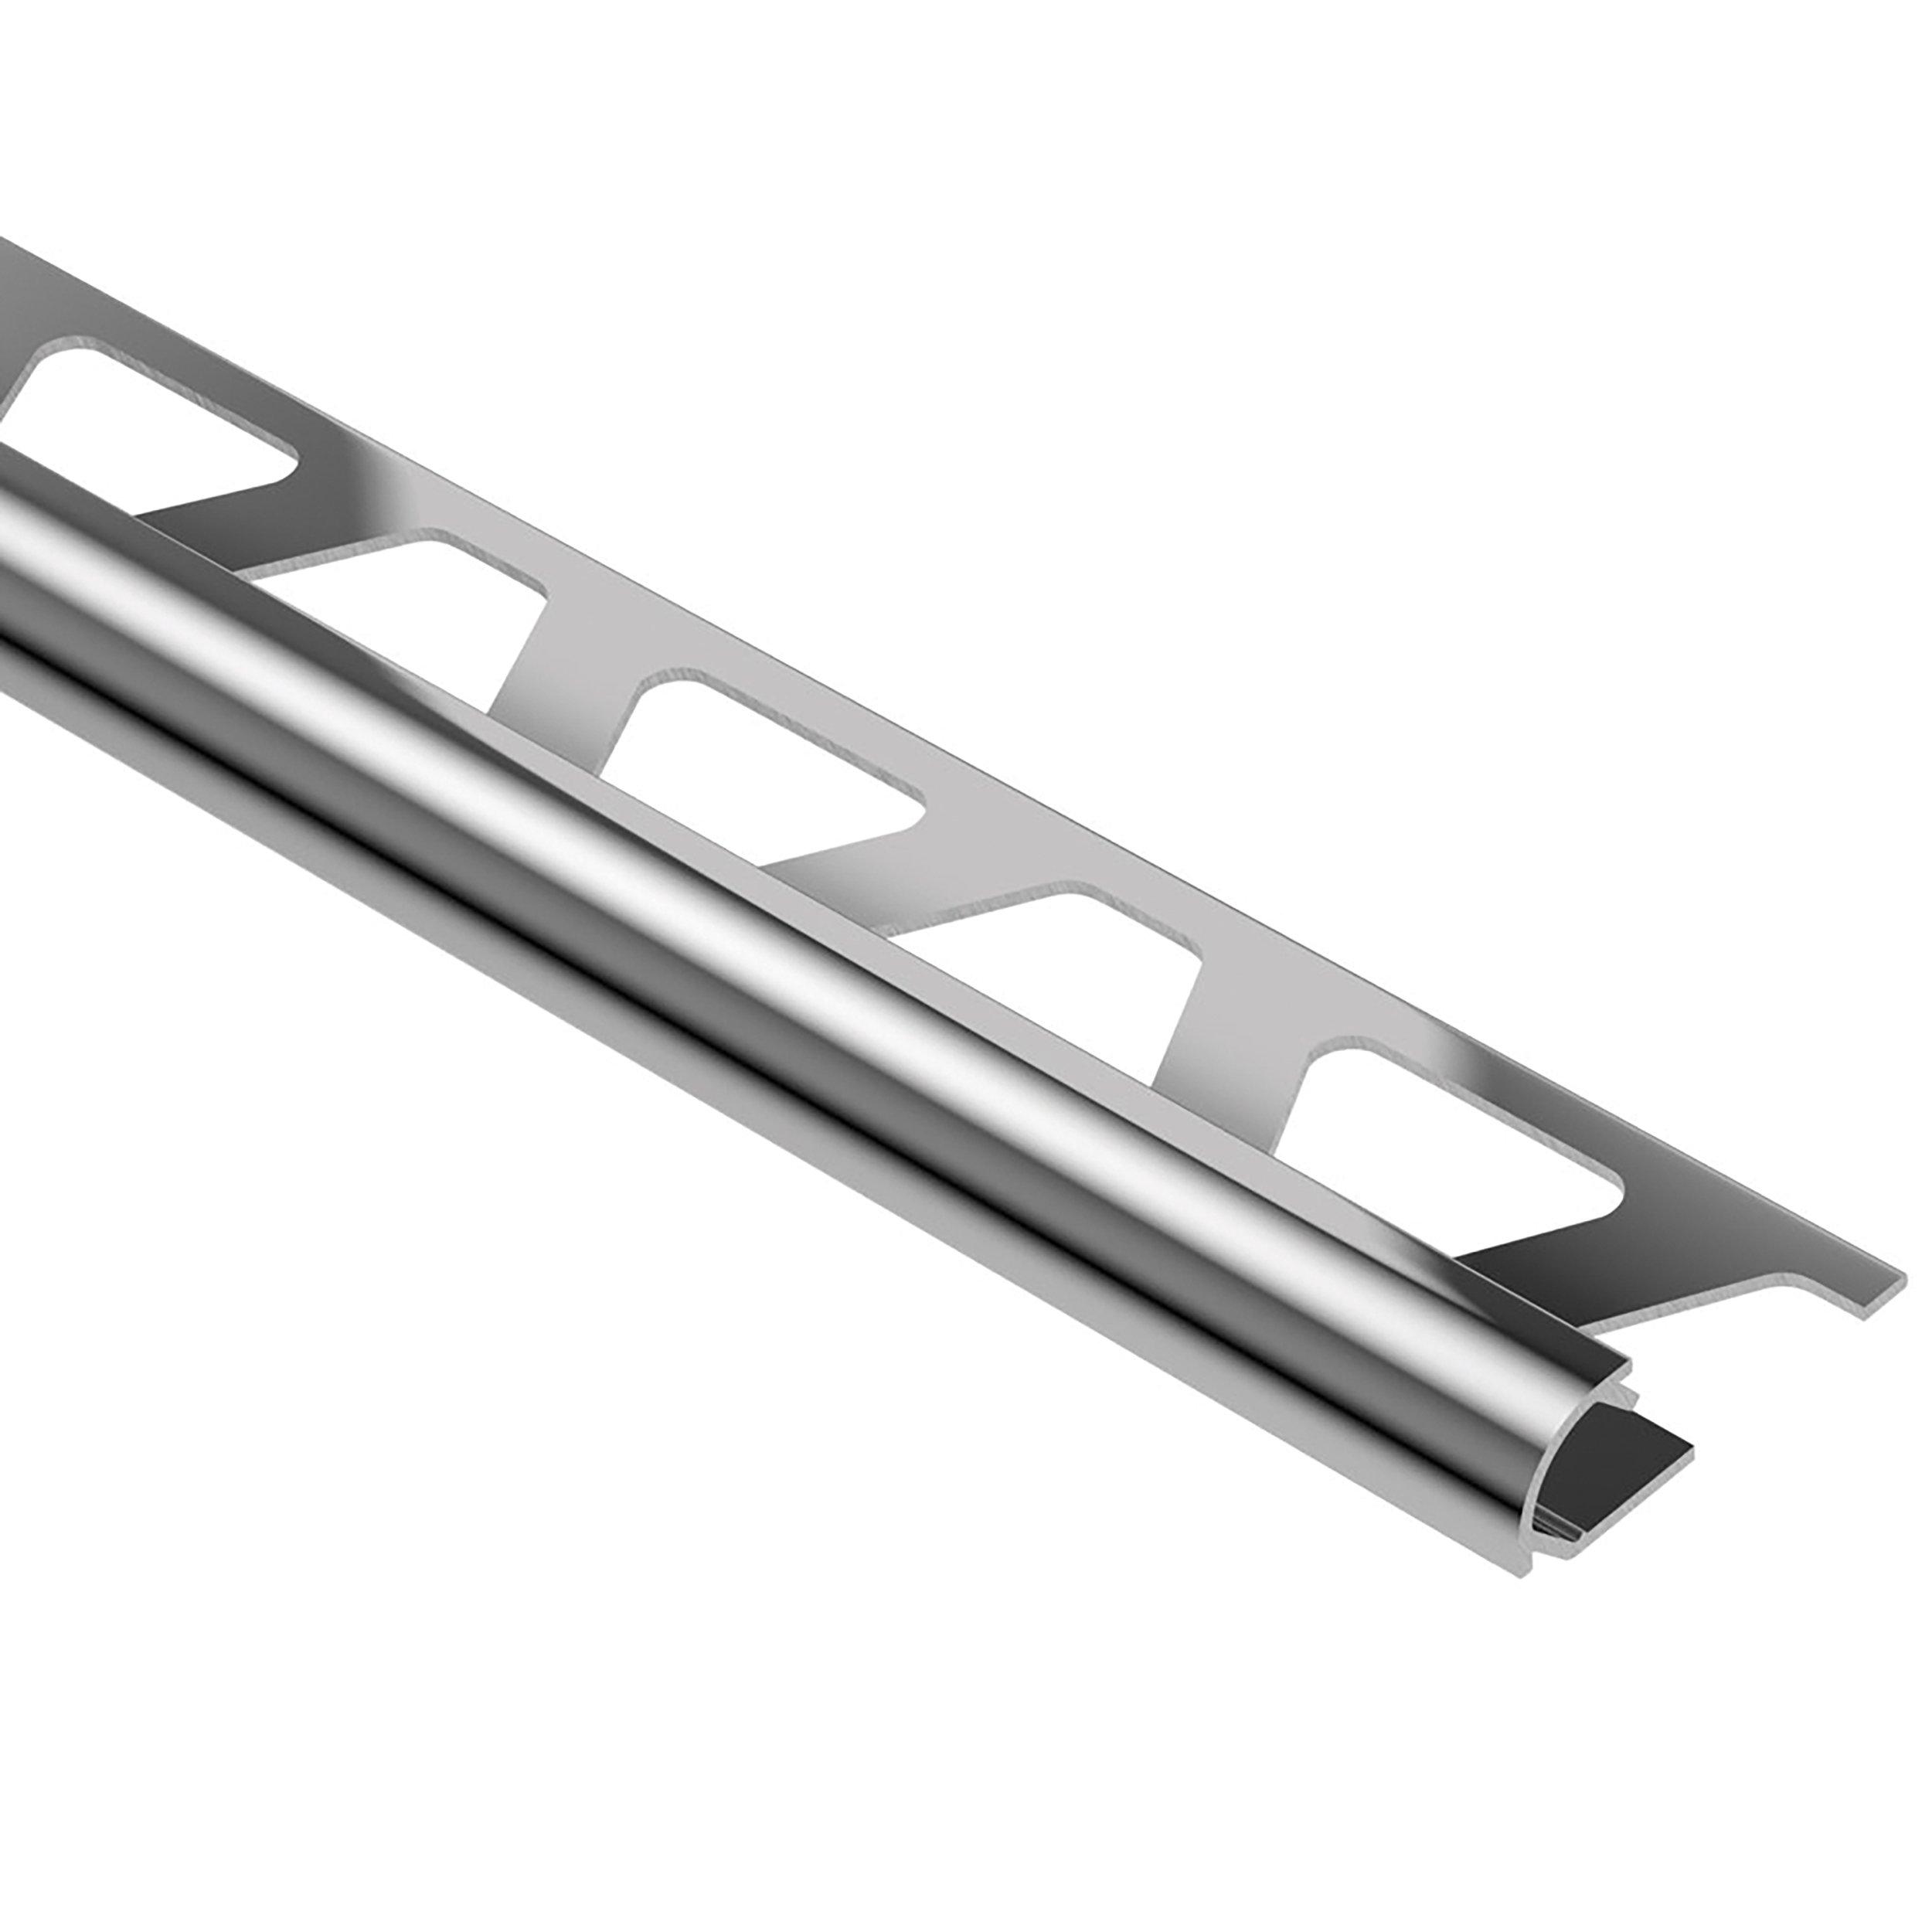 Schluter-Rondec Bullnose Edge Trim 3/8in. in Polished Chrome Anodized Aluminum